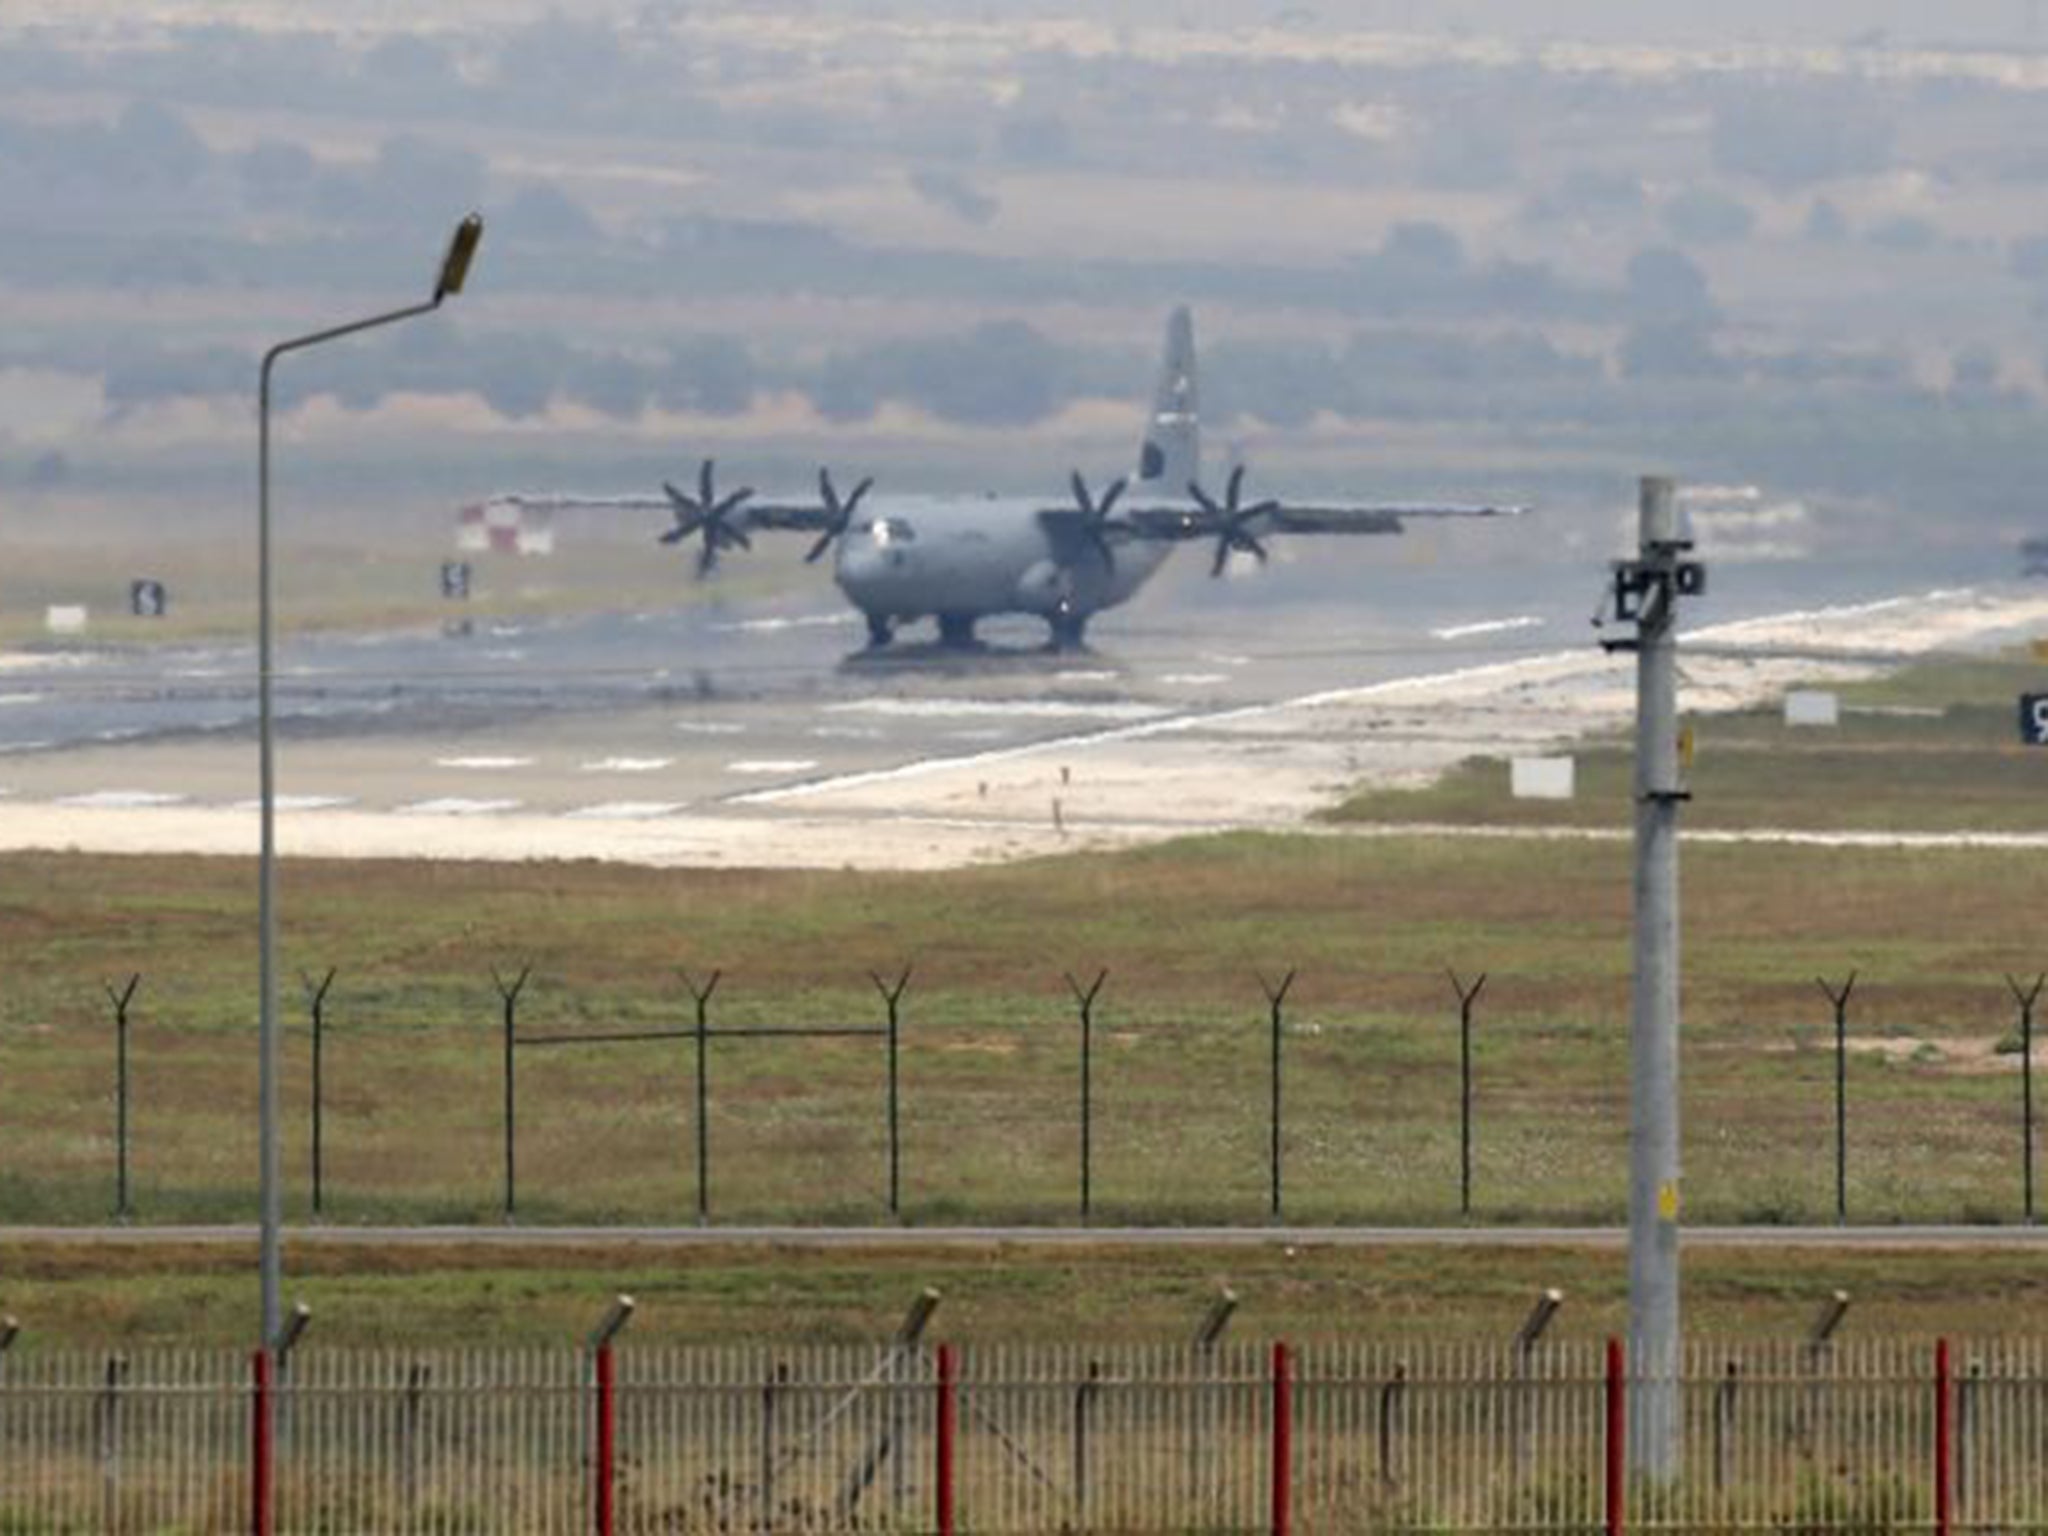 US aircraft have yet to start using Incirlik airbase, and the reason is that Turkey does not want US aircraft using it to launch air strikes